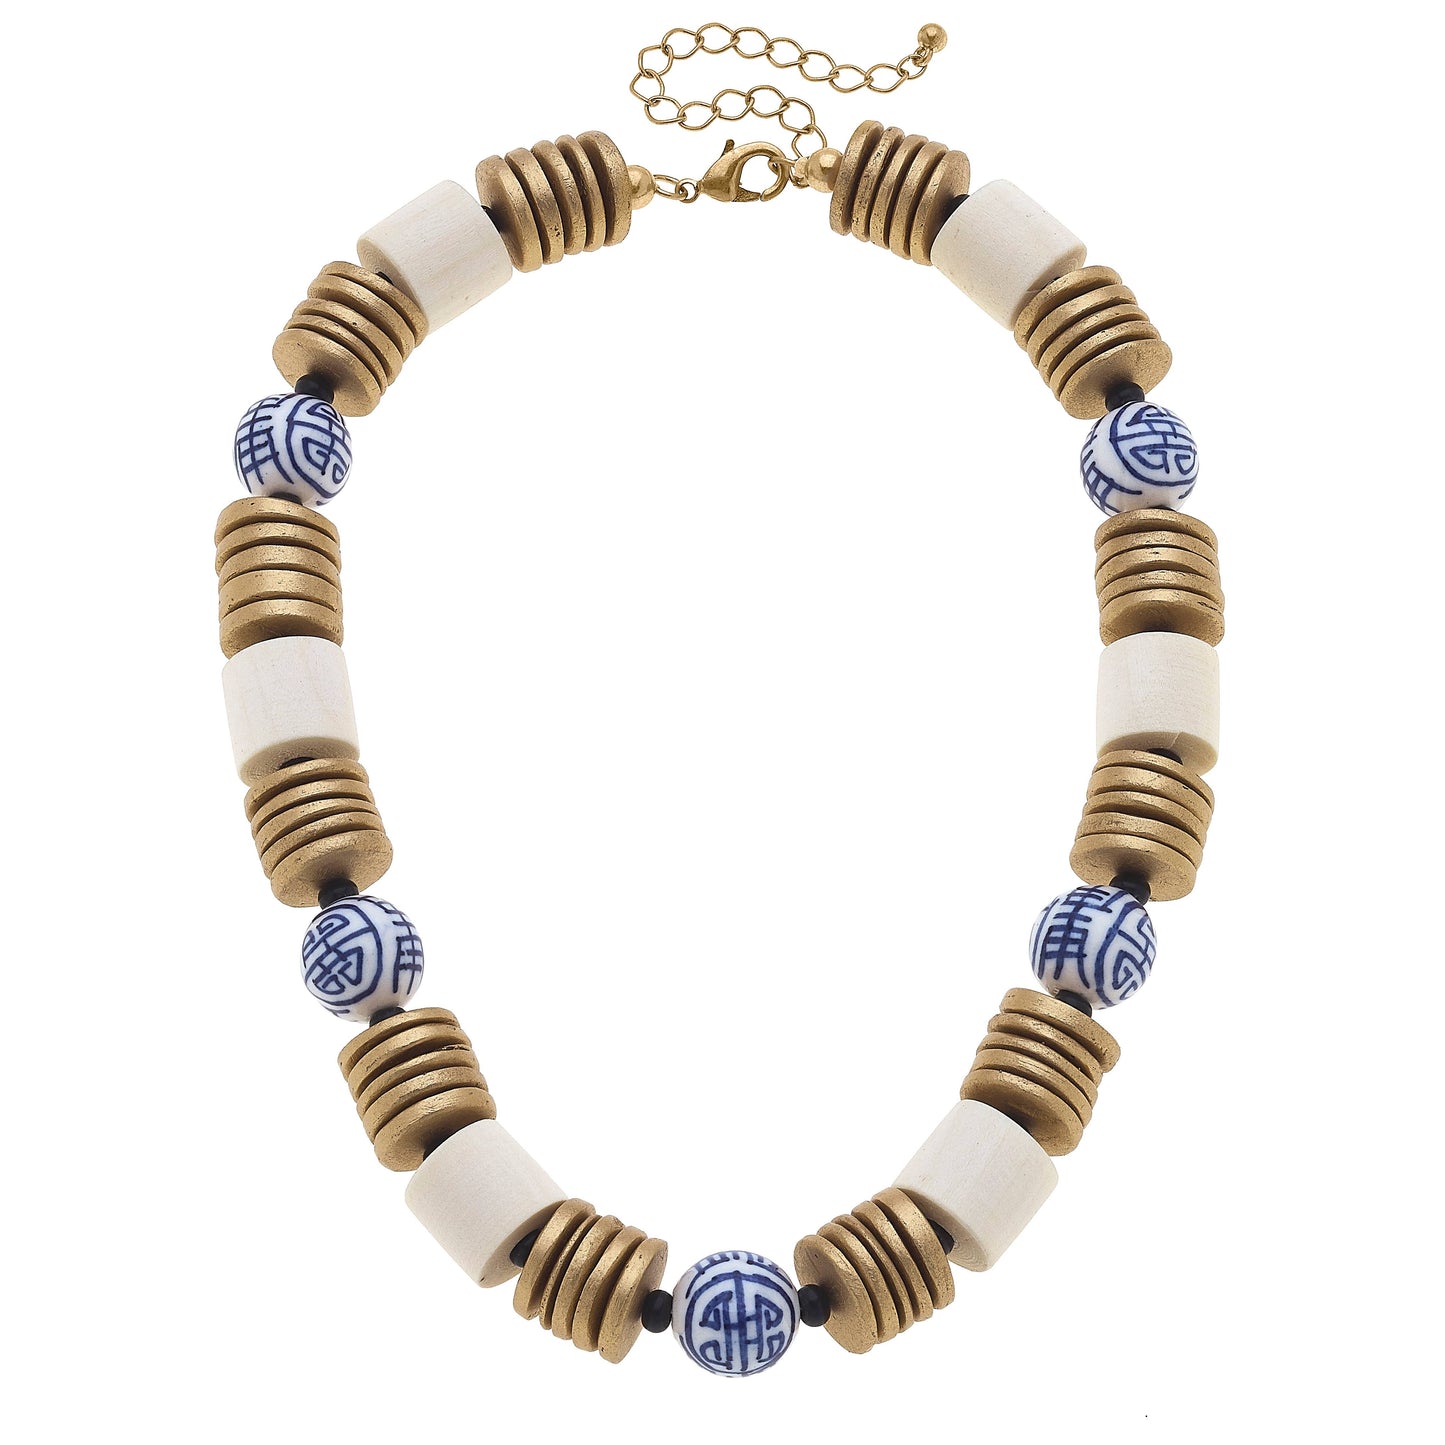 Lorelei Chinoiserie & Painted Wood Necklace in Navy